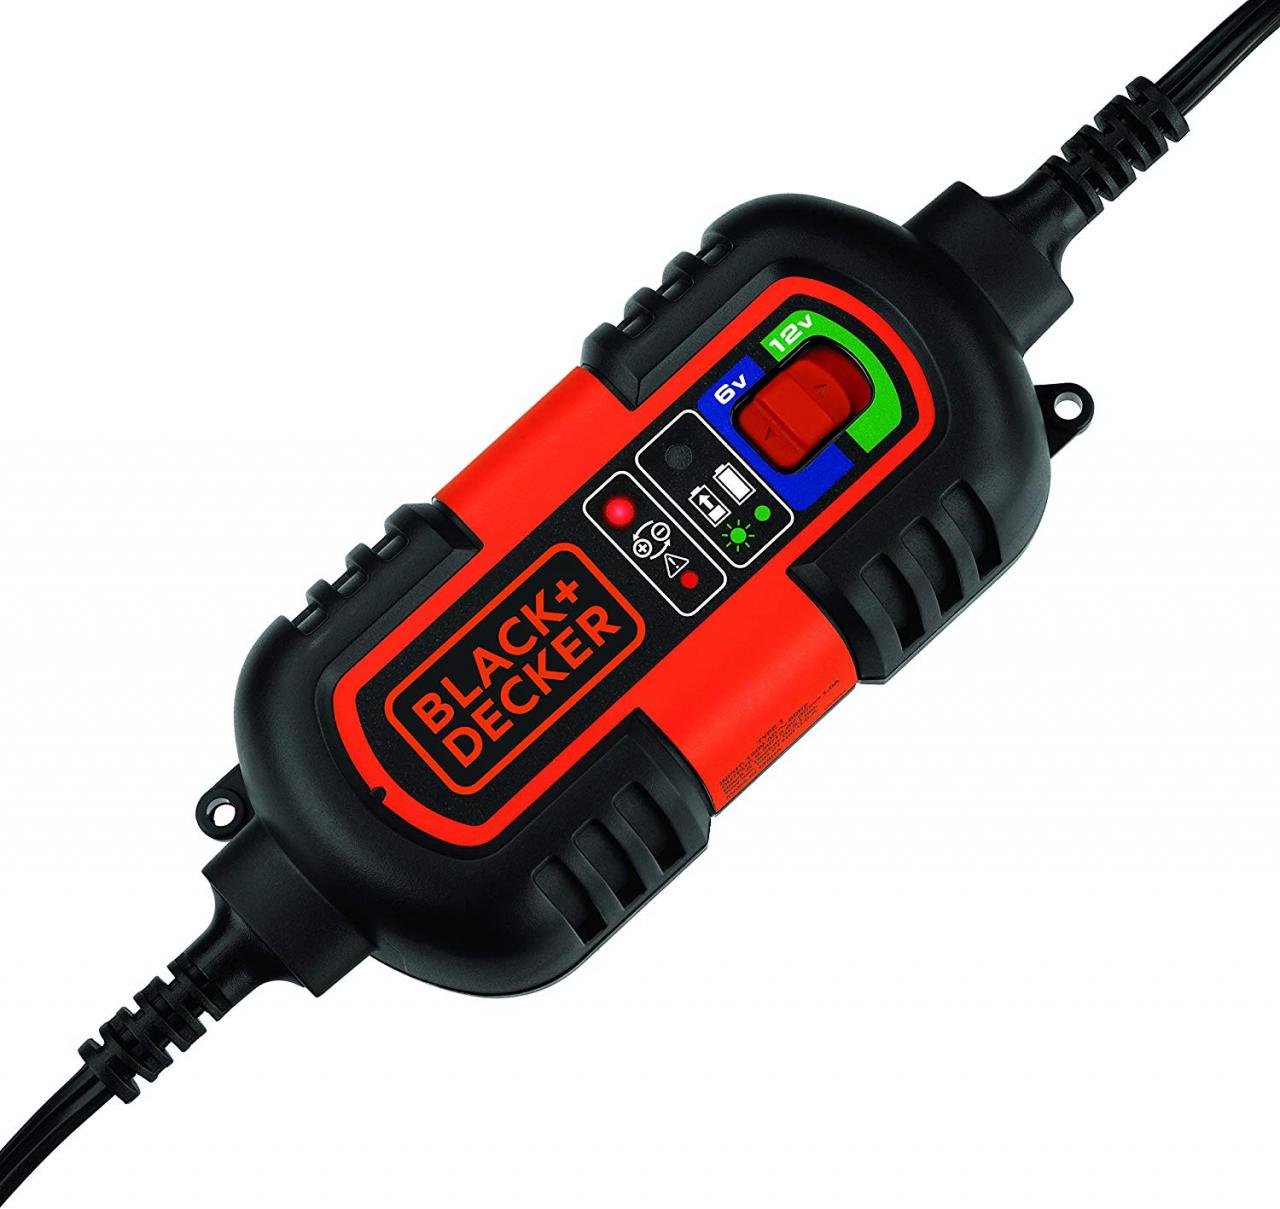 MOTOPOWER Car Battery Charger and Maintainer